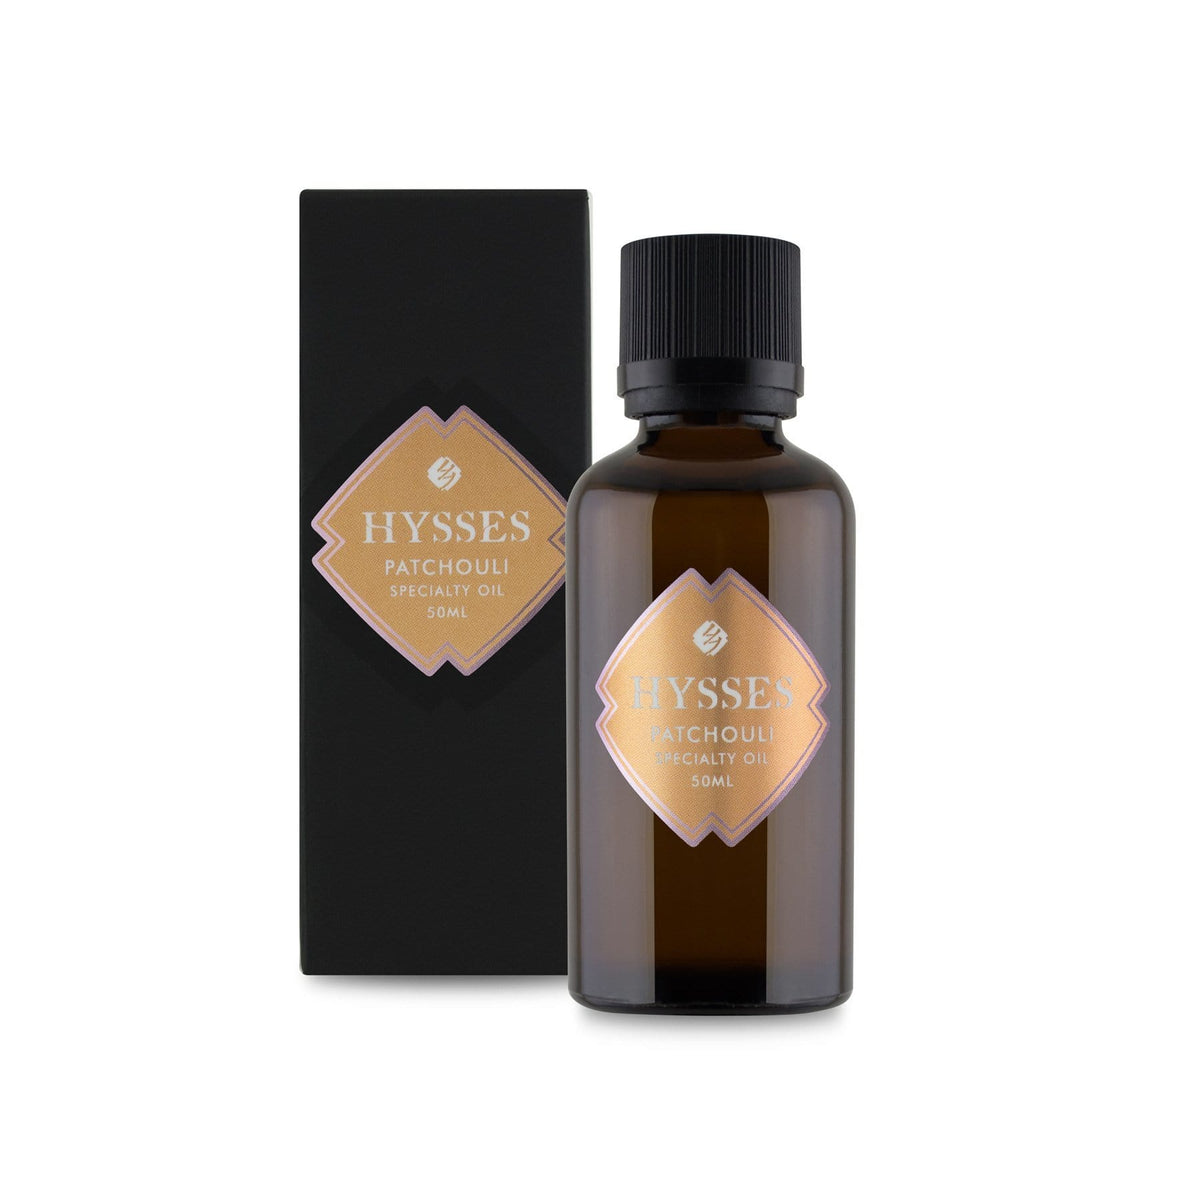 Hysses Essential Oil 50ml Specialty Oil Patchouli